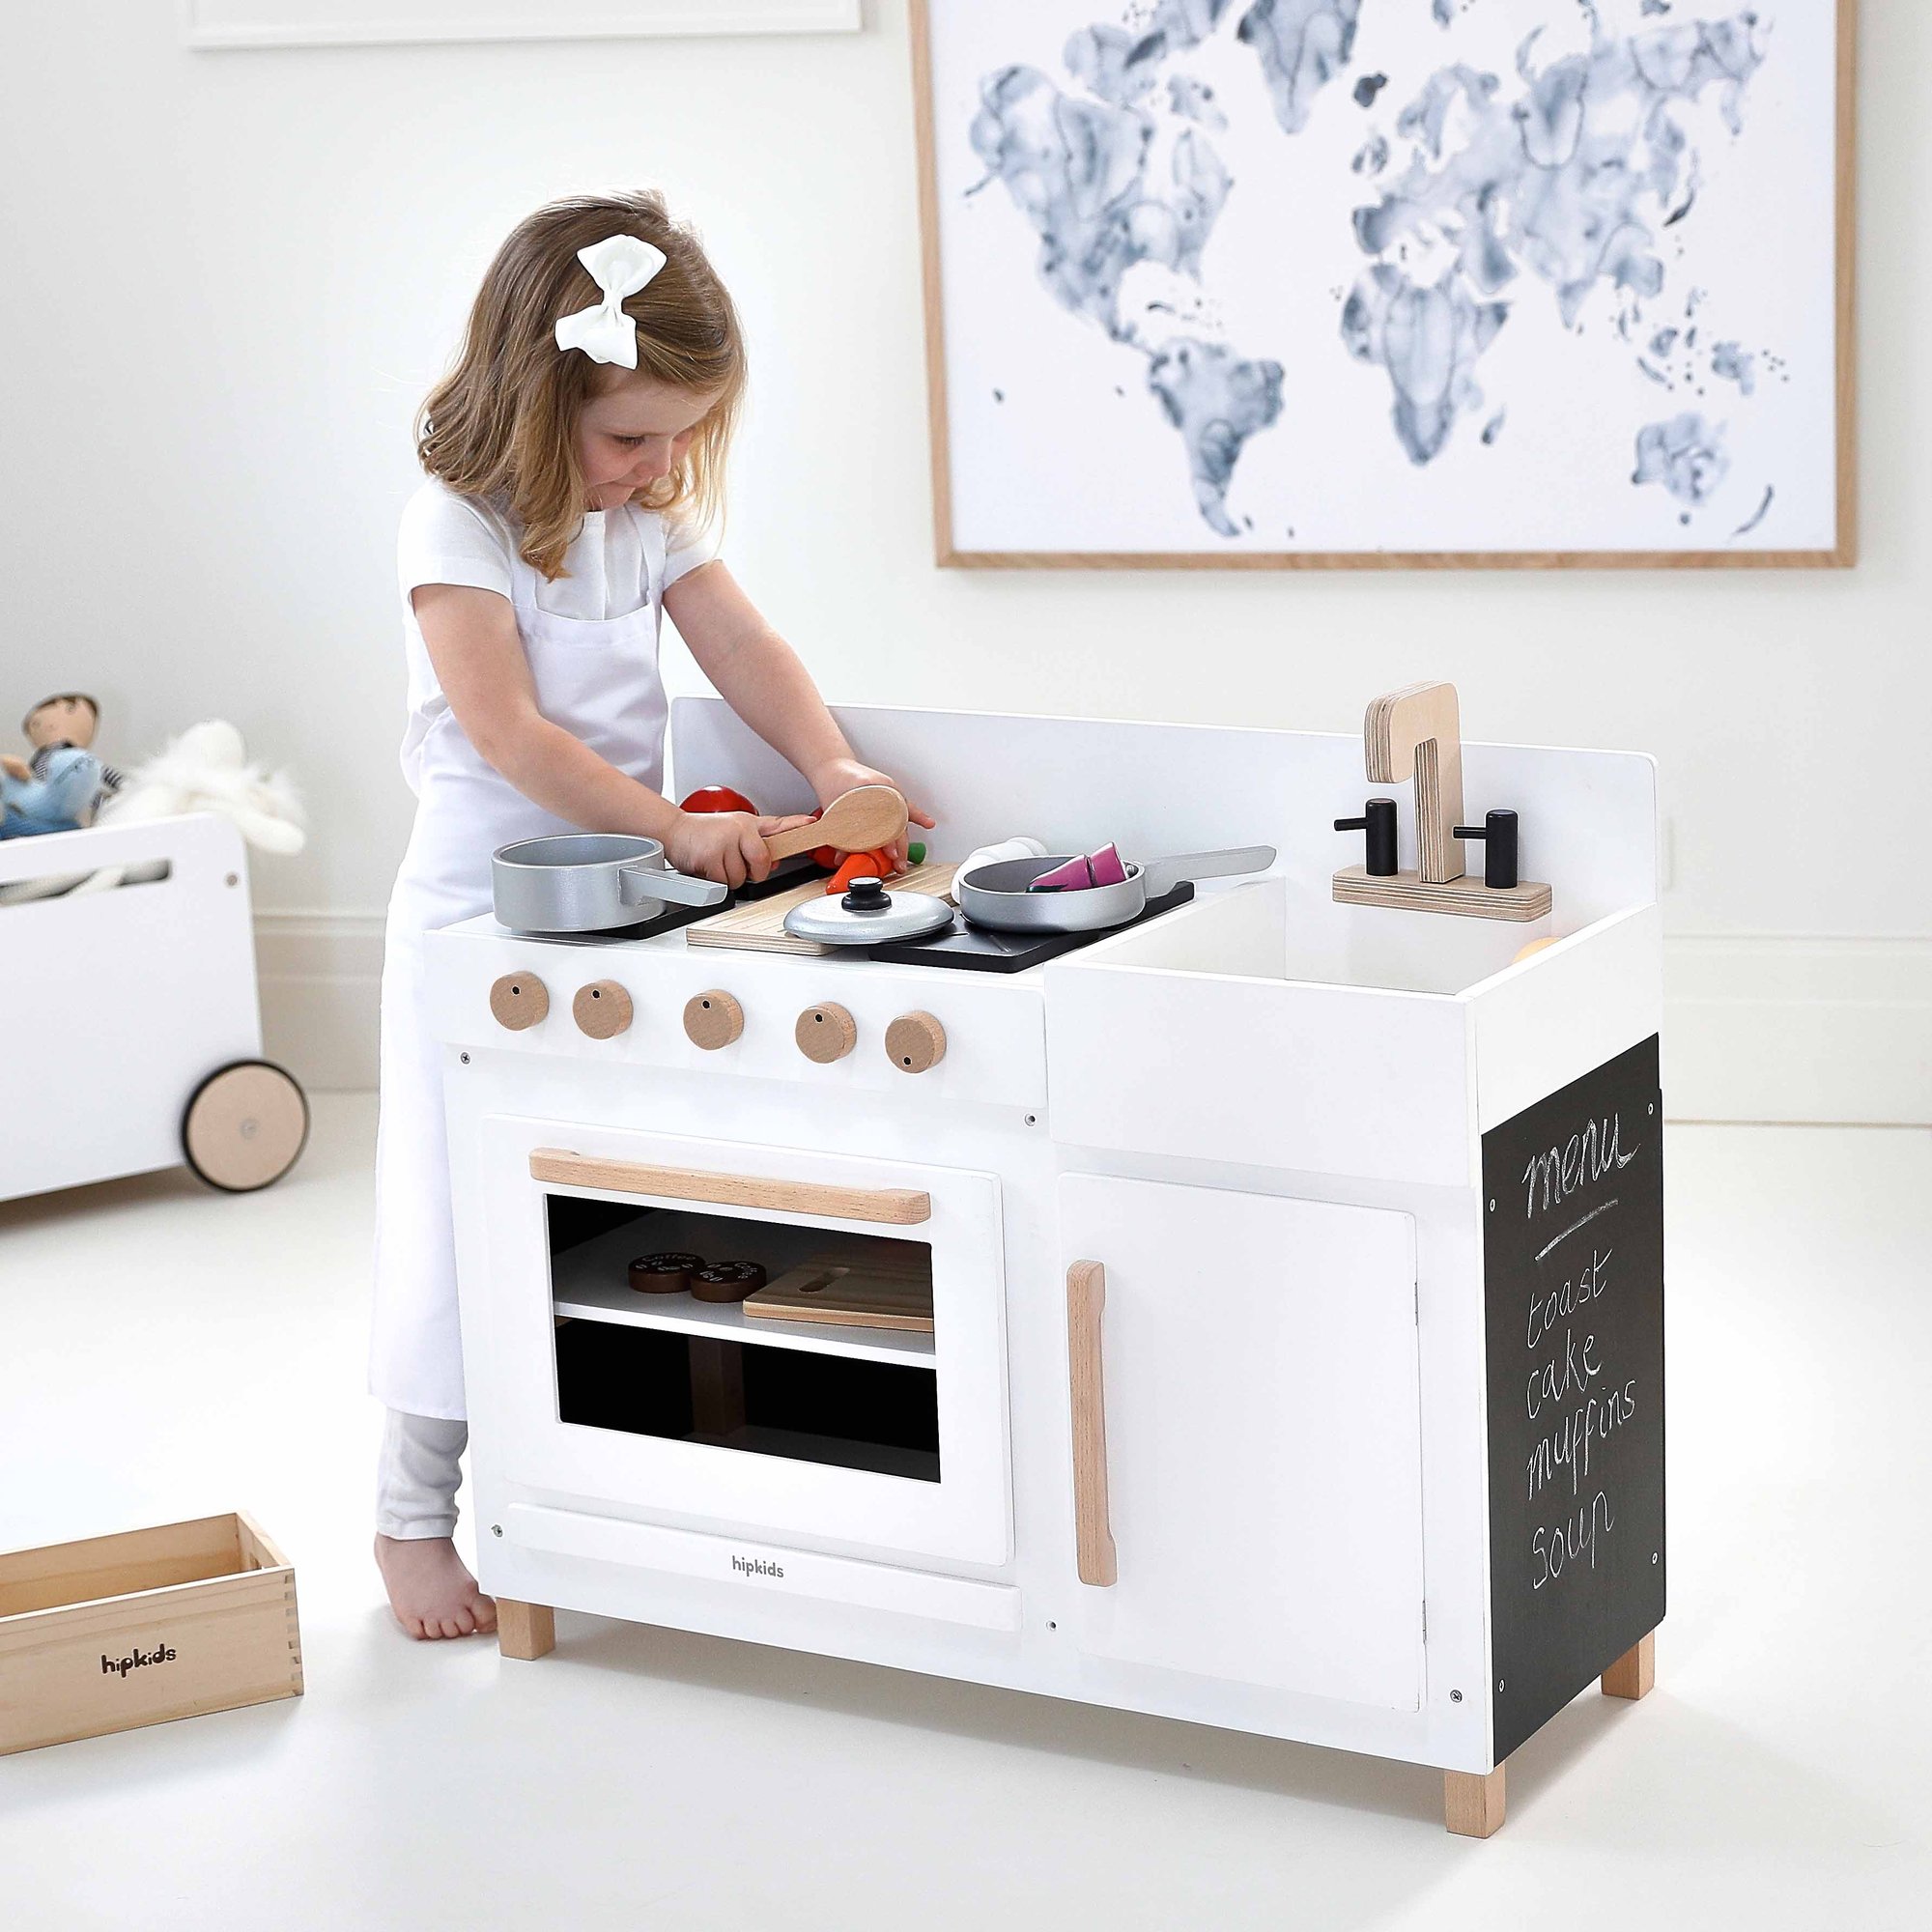 Seven Of The Best Wooden Toy Kitchens For Toddlers And Preschoolers